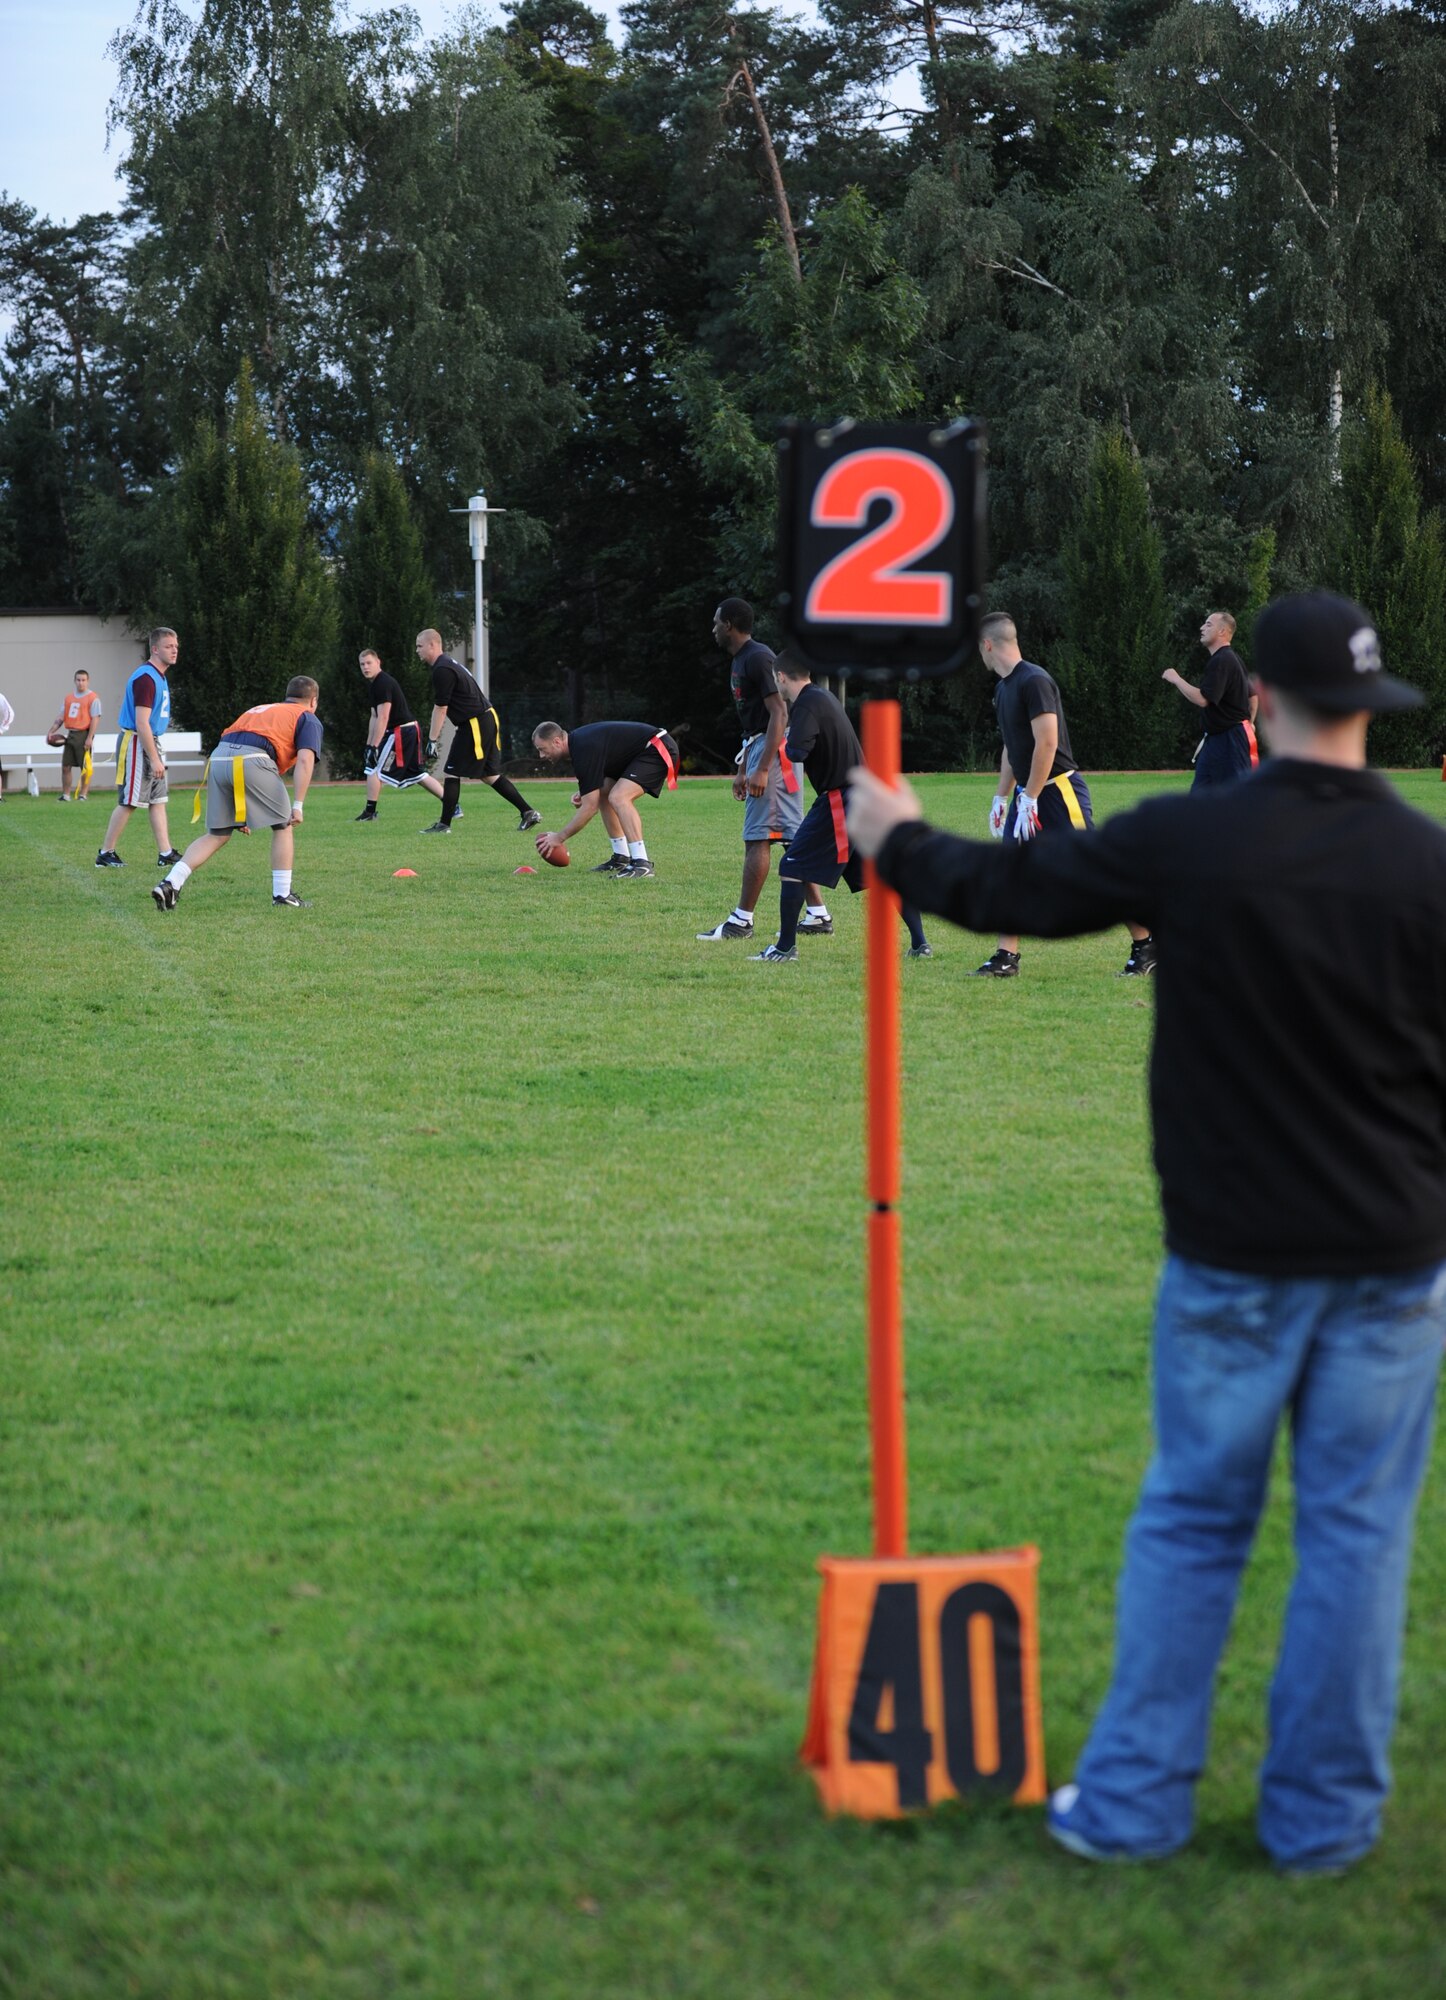 Airmen from the 86th Communications Squadron play intramural flag football against the 86th Aircraft Maintenance Squadron at the Southside Gym, Ramstein Air Base, Germany, Sept. 13, 2010. Seventeen flag football teams from Ramstein compete yearly to go to the U.S. Air Forces in Europe Championship at Camp Darby, Italy. (U.S. Air Force photo by Senior Airman Caleb Pierce)